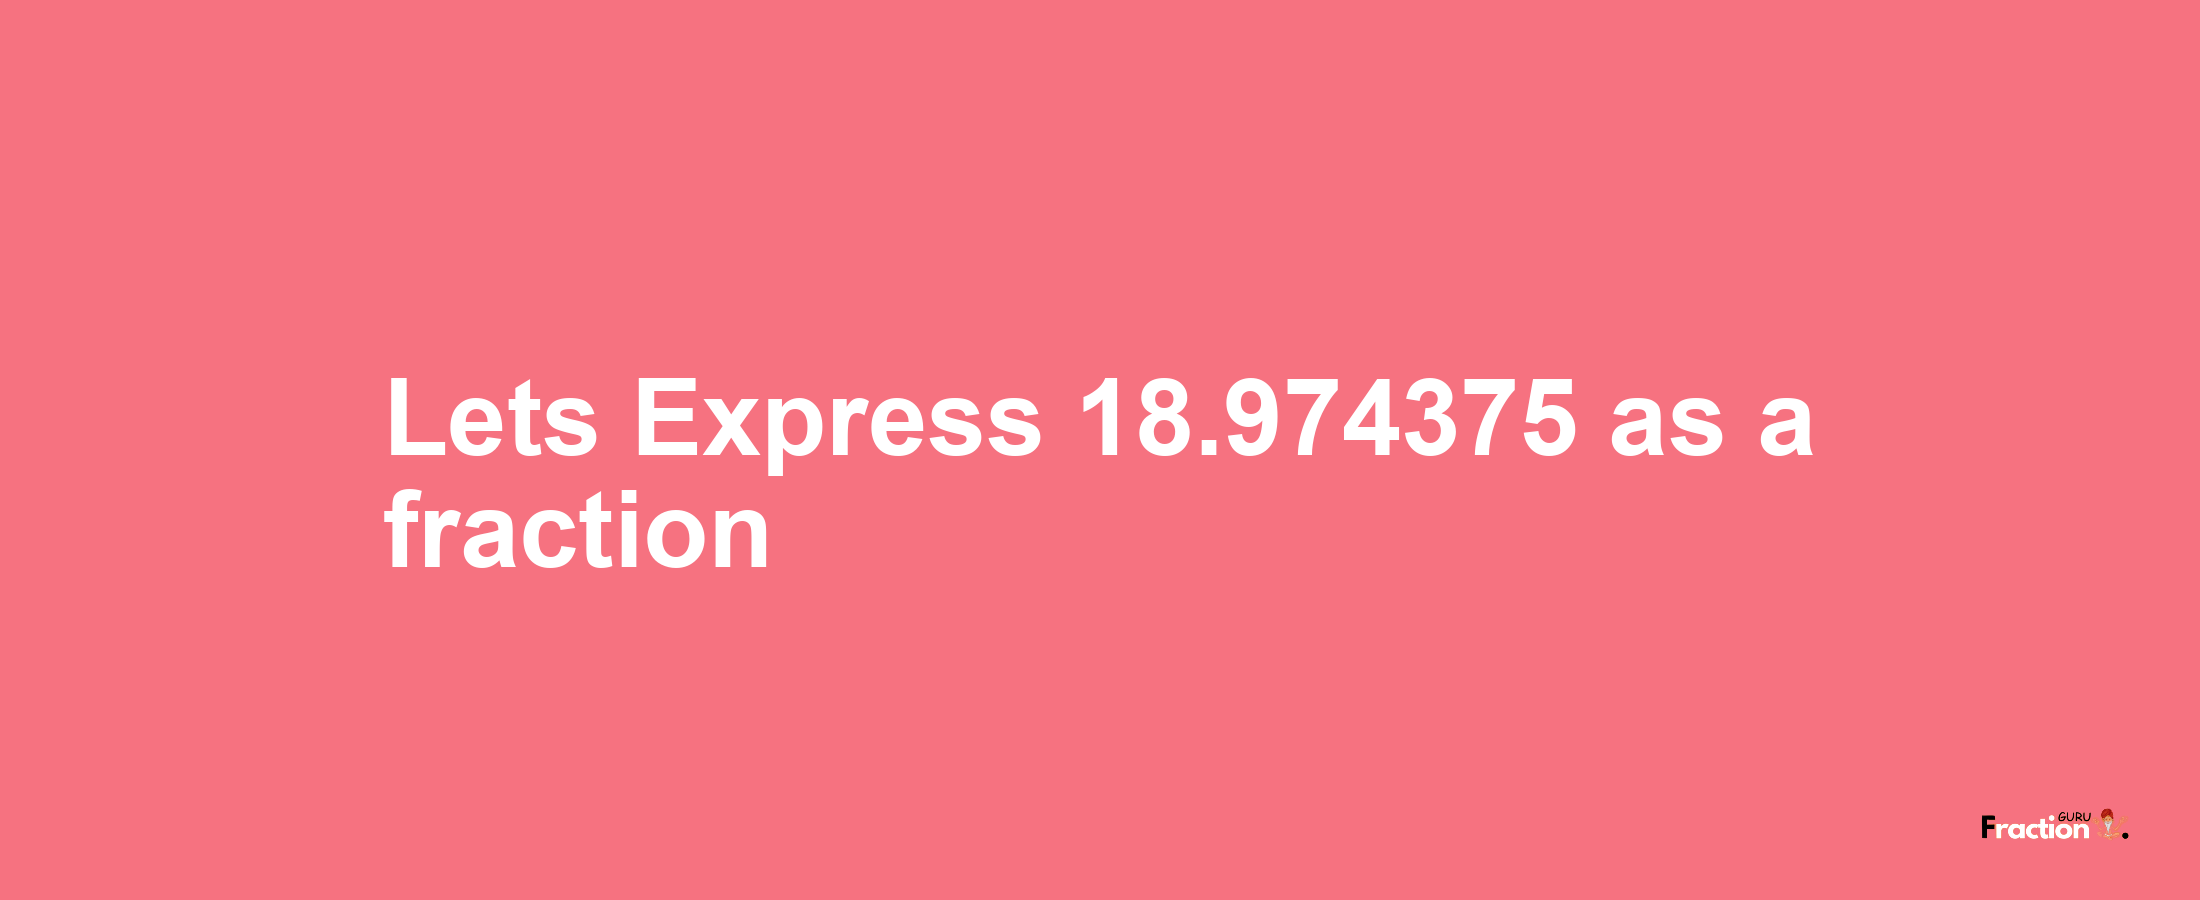 Lets Express 18.974375 as afraction